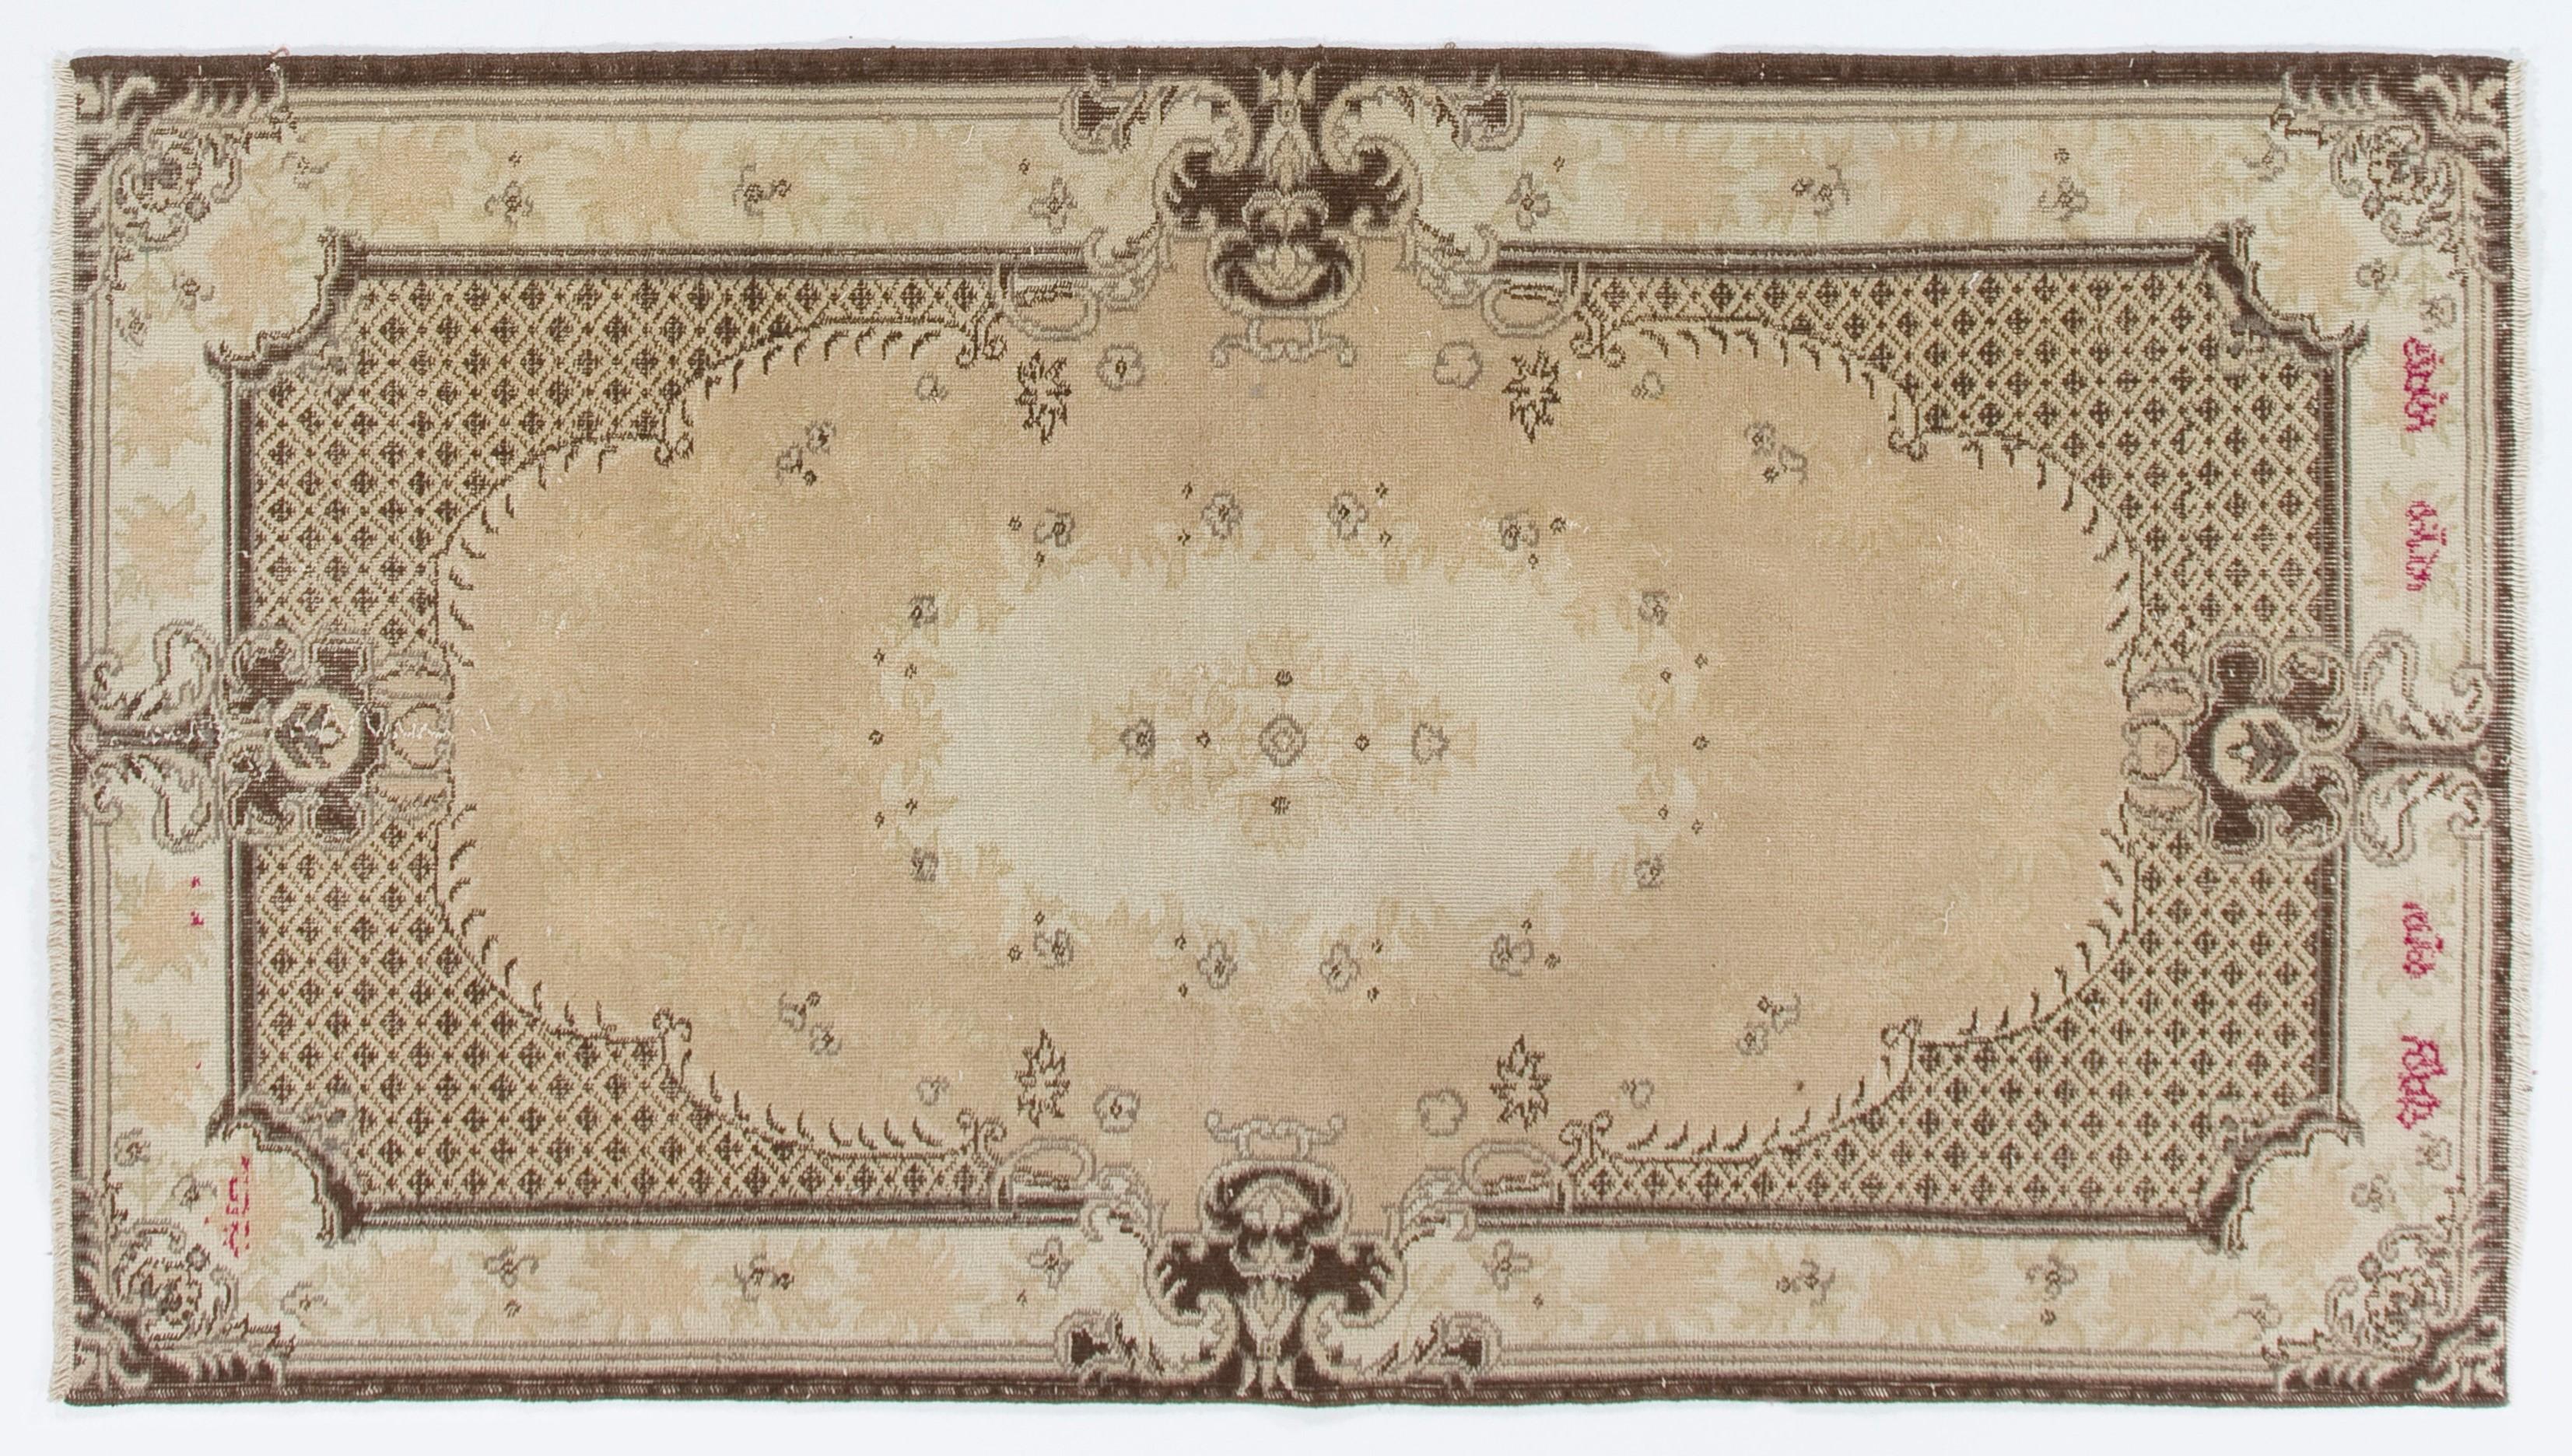 A vintage hand knotted Turkish rug with a central medallion design depicting rosettes and angular leaves in steel with touches of pink against a sandy cream field. 

The brown outlines of rosettes as well as the meandering brown lines running